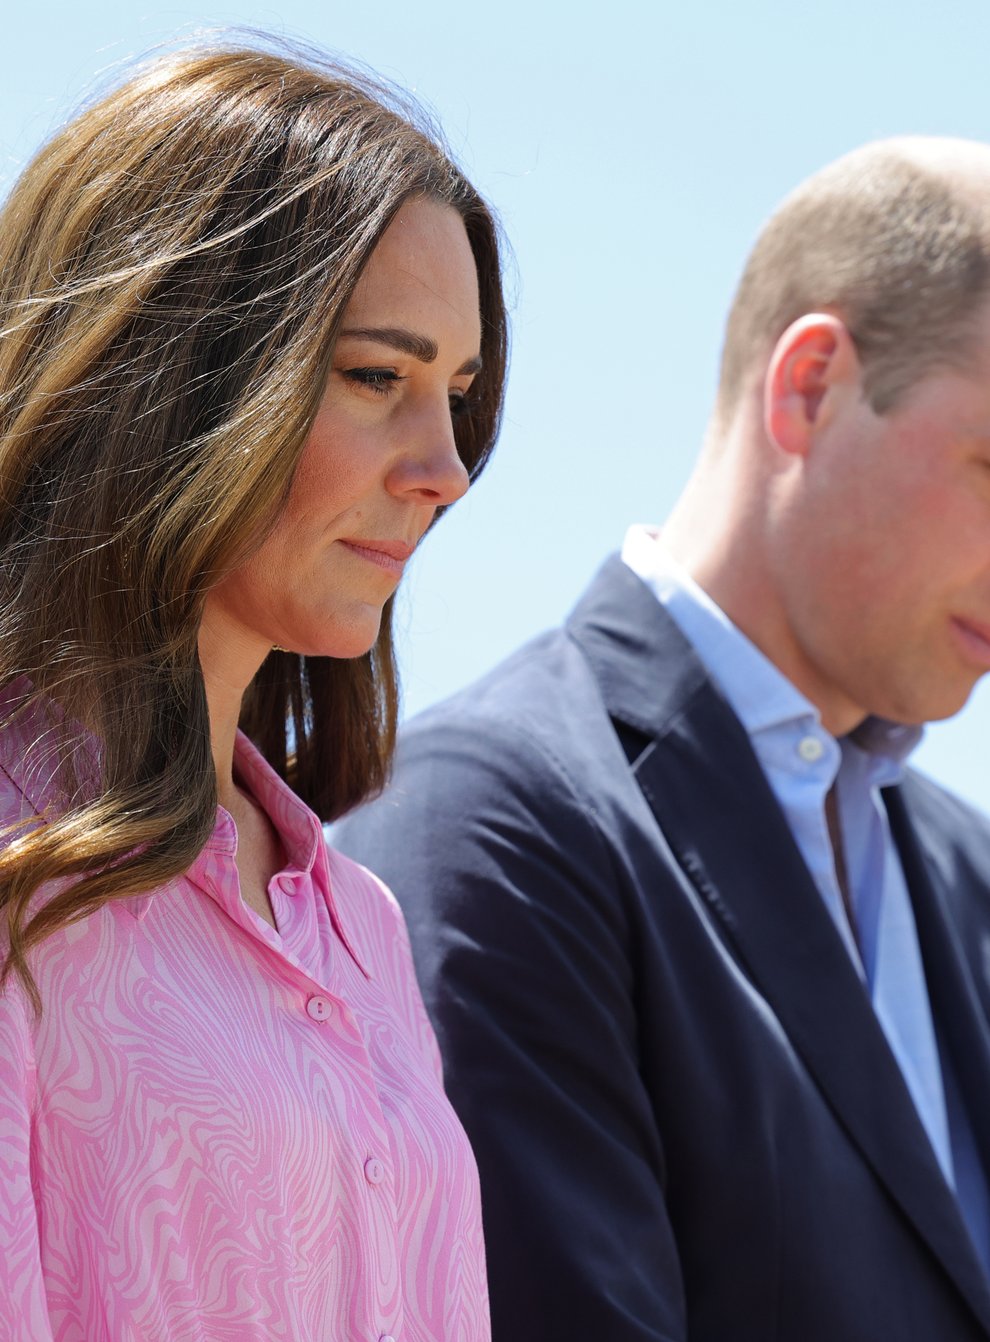 The Duke and Duchess of Cambridge faced criticism during their Caribbean tour (Chris Jackson/PA)